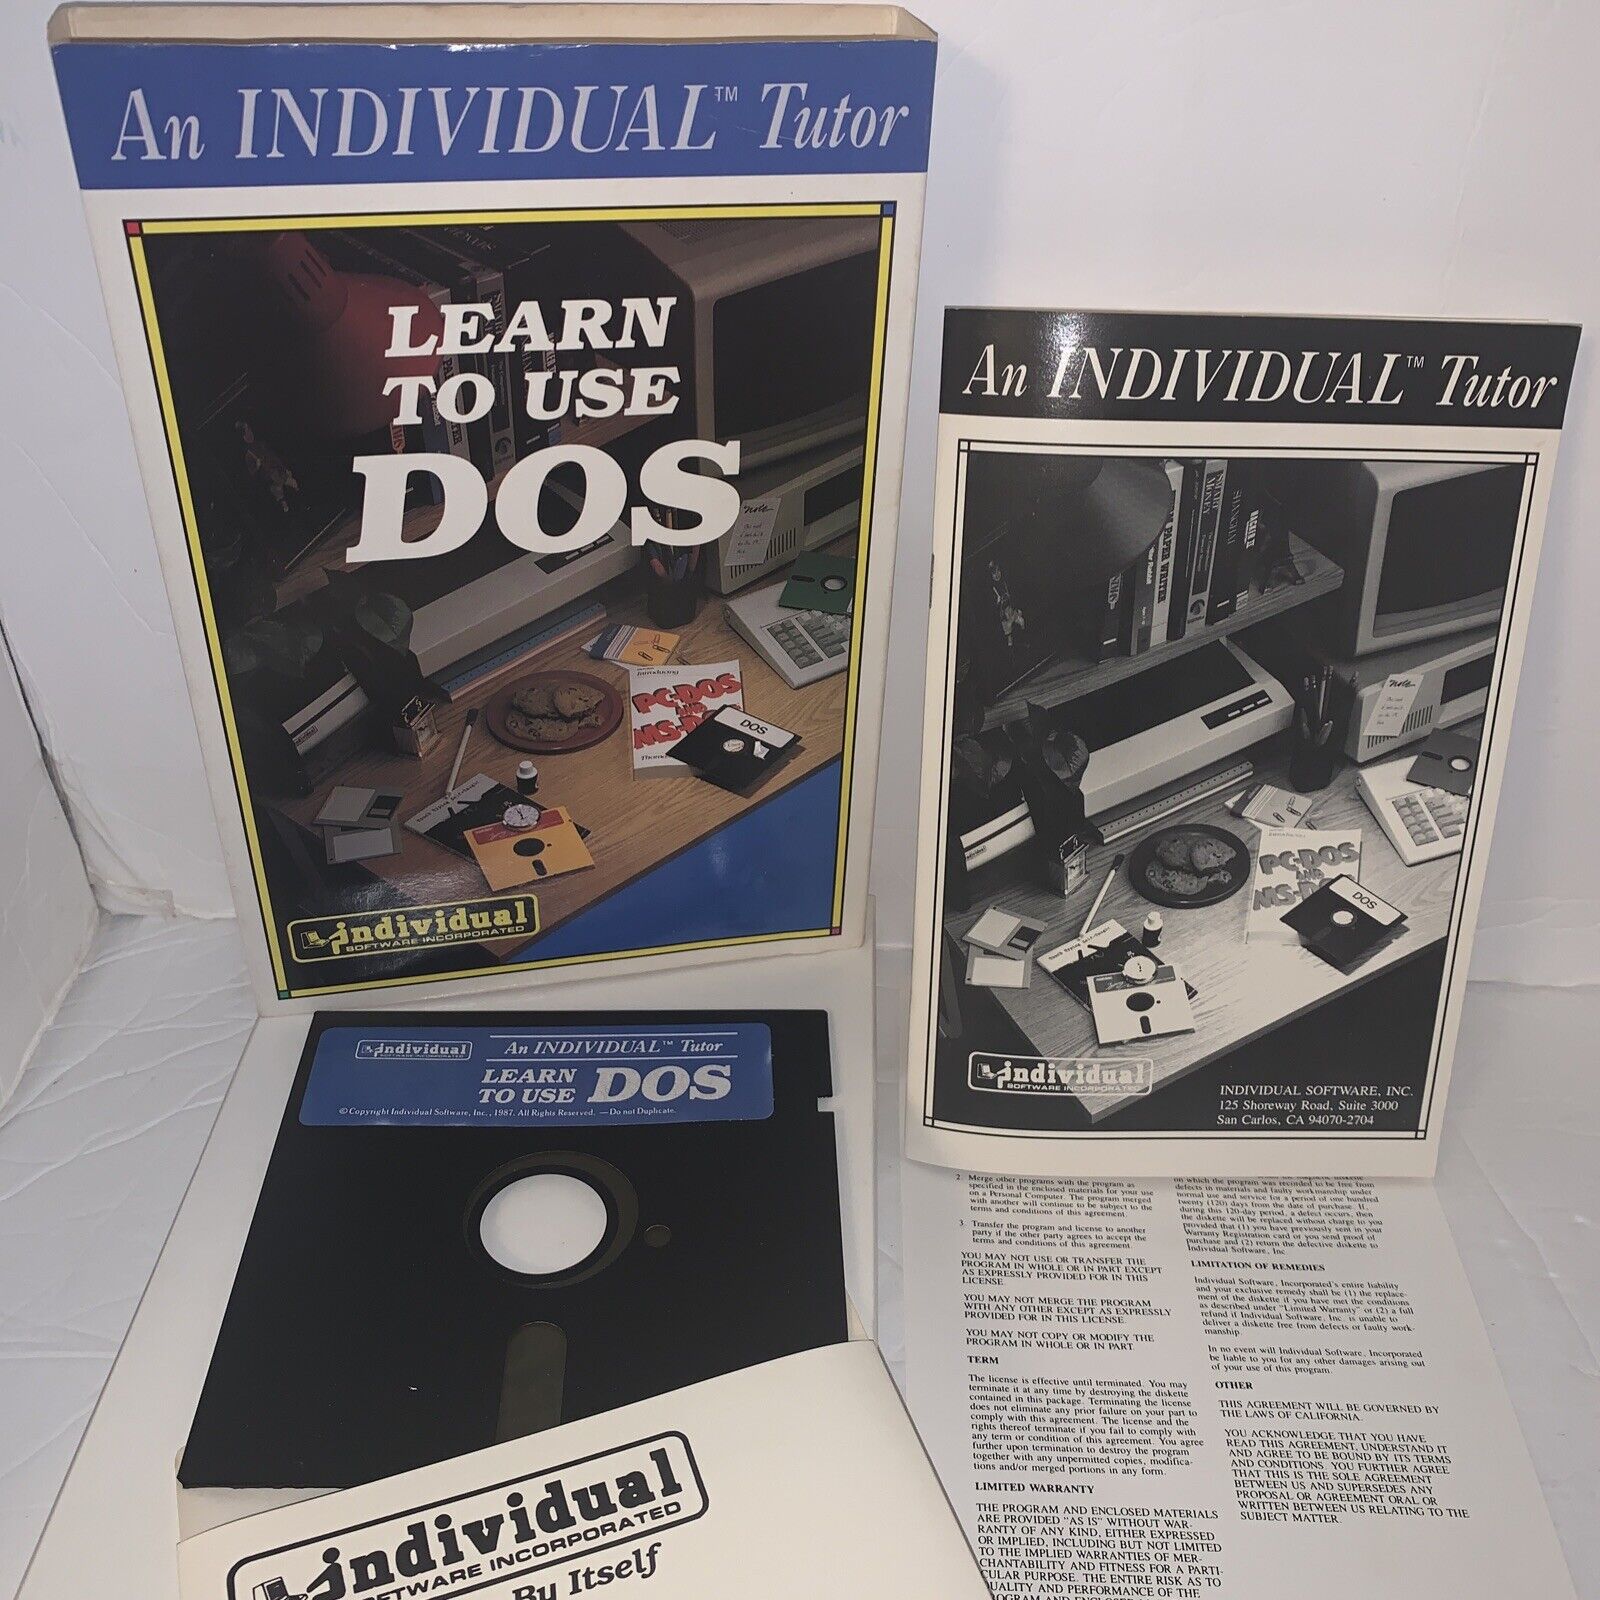 Vintage Computer Based Learning Tools - Learn To Use DOS By Individual Software